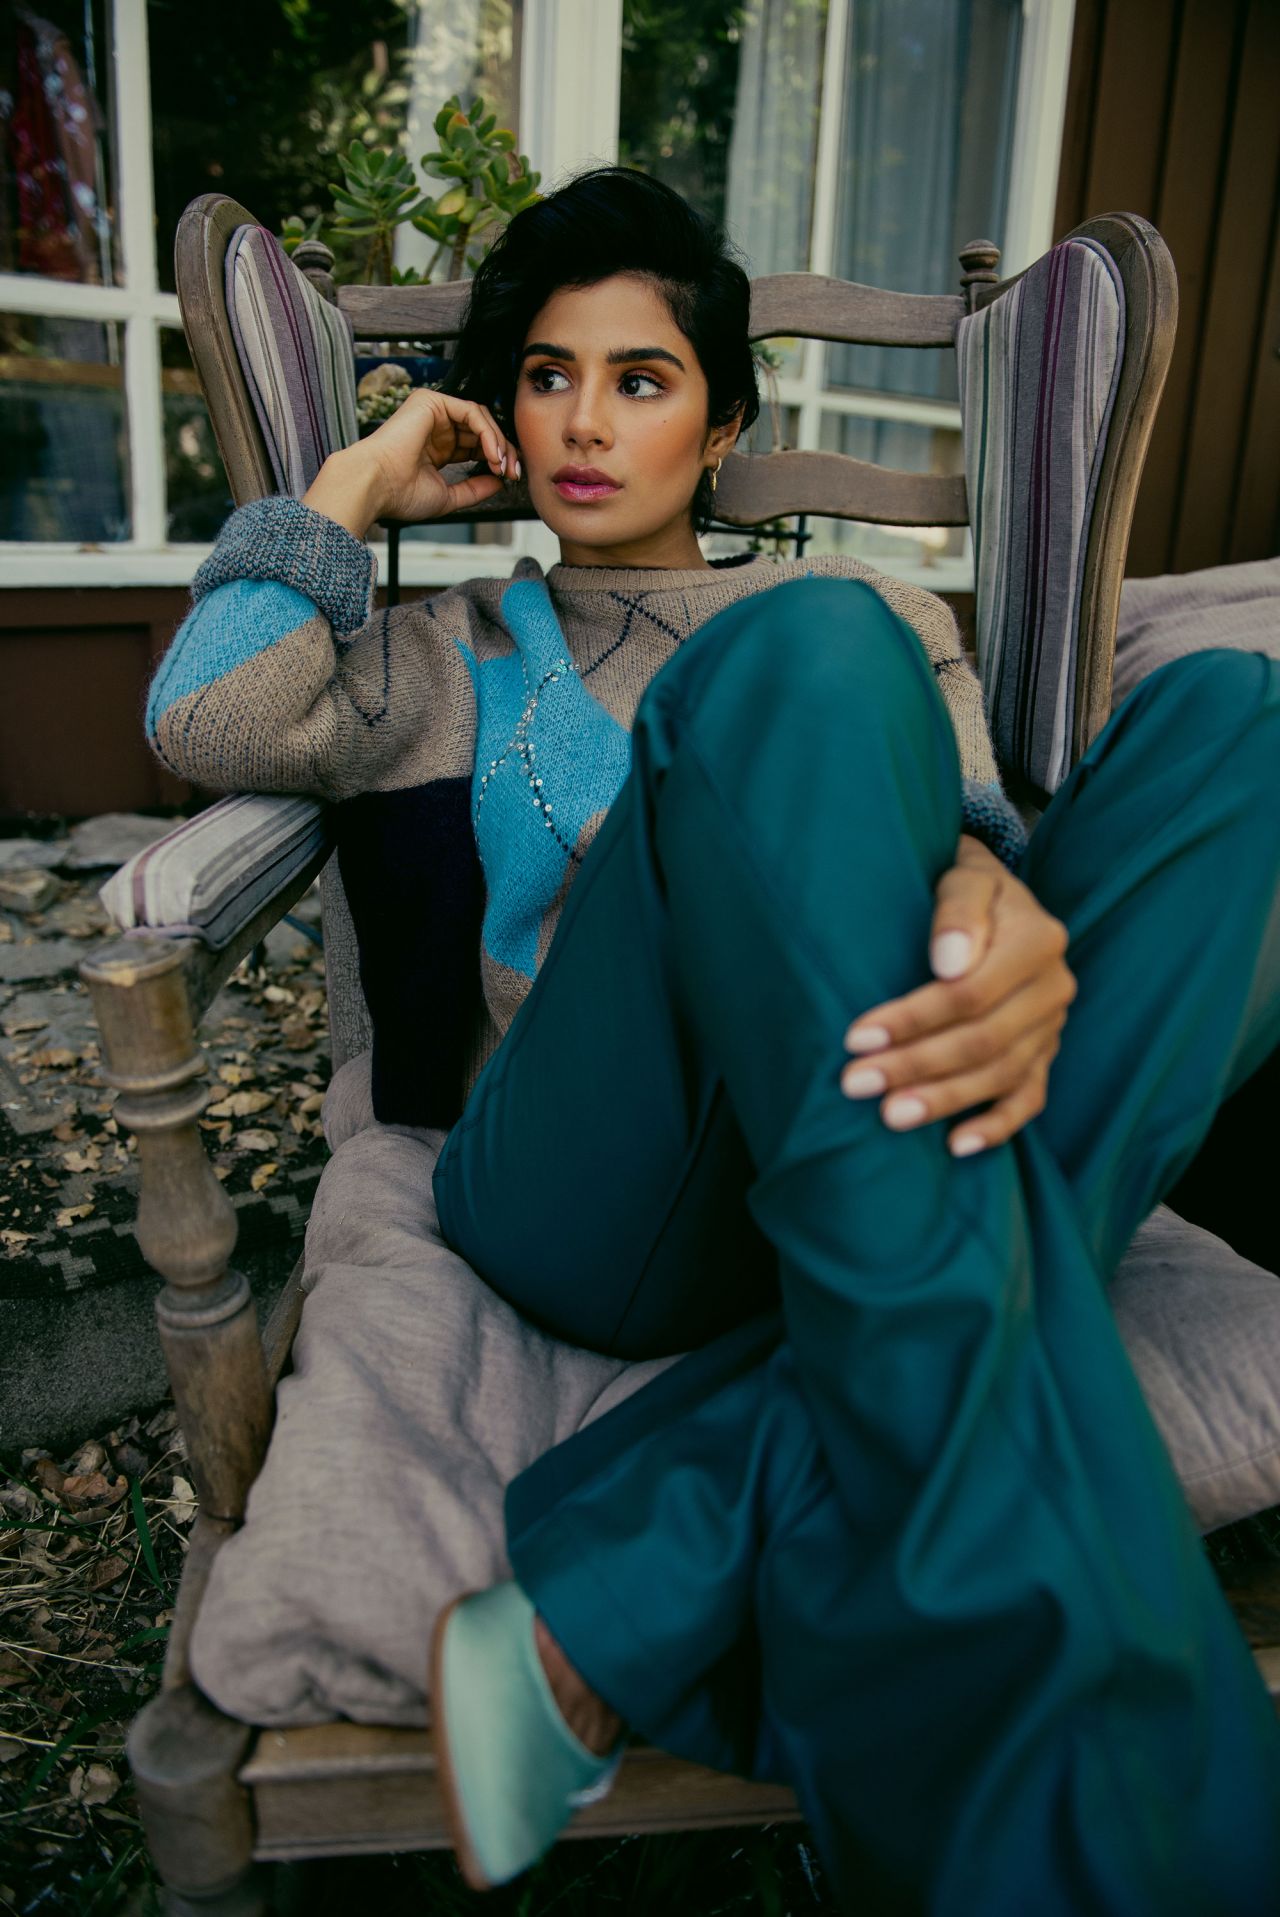 Diane Guerrero - Photoshoot for Pulse Spikes Summer 2019.